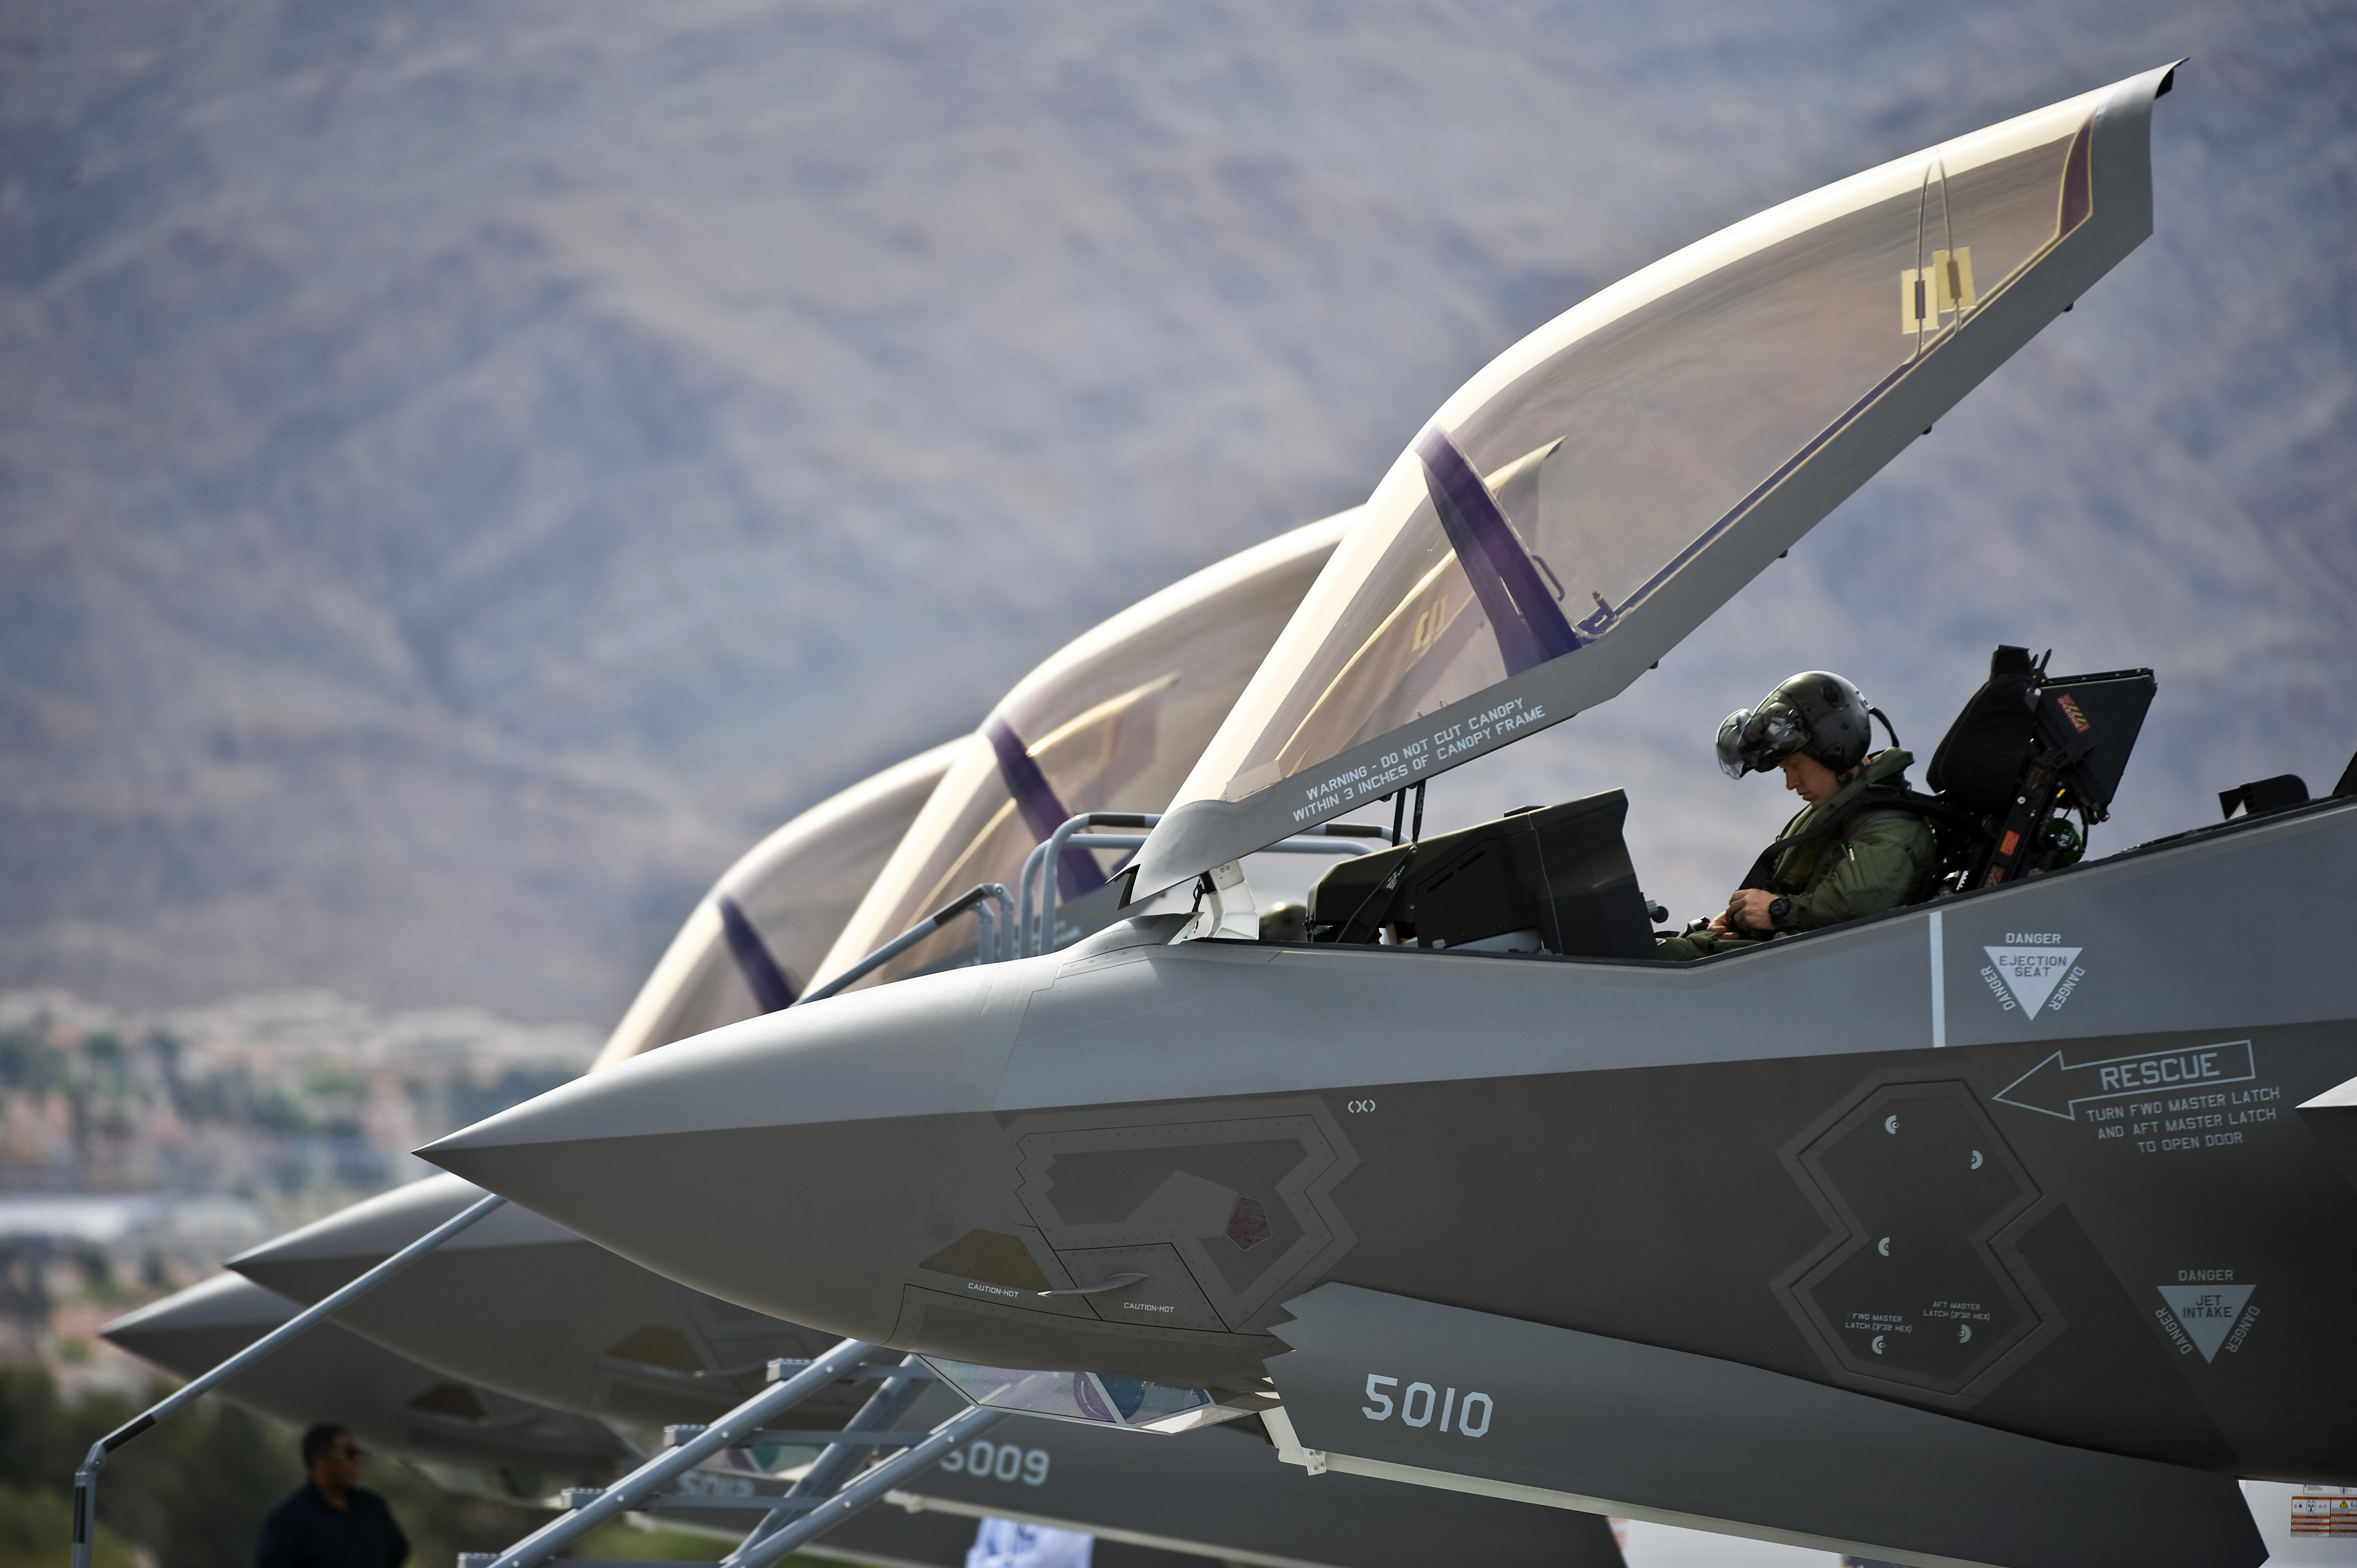 U.S. Air Force Capt. Brad Matherne, a pilot with the 422nd Test and Evaluation Squadron, conducts preflight checks inside an F-35A Lightning II aircraft before its first operational training mission April 4, 2013, at Nellis AFB, NV.